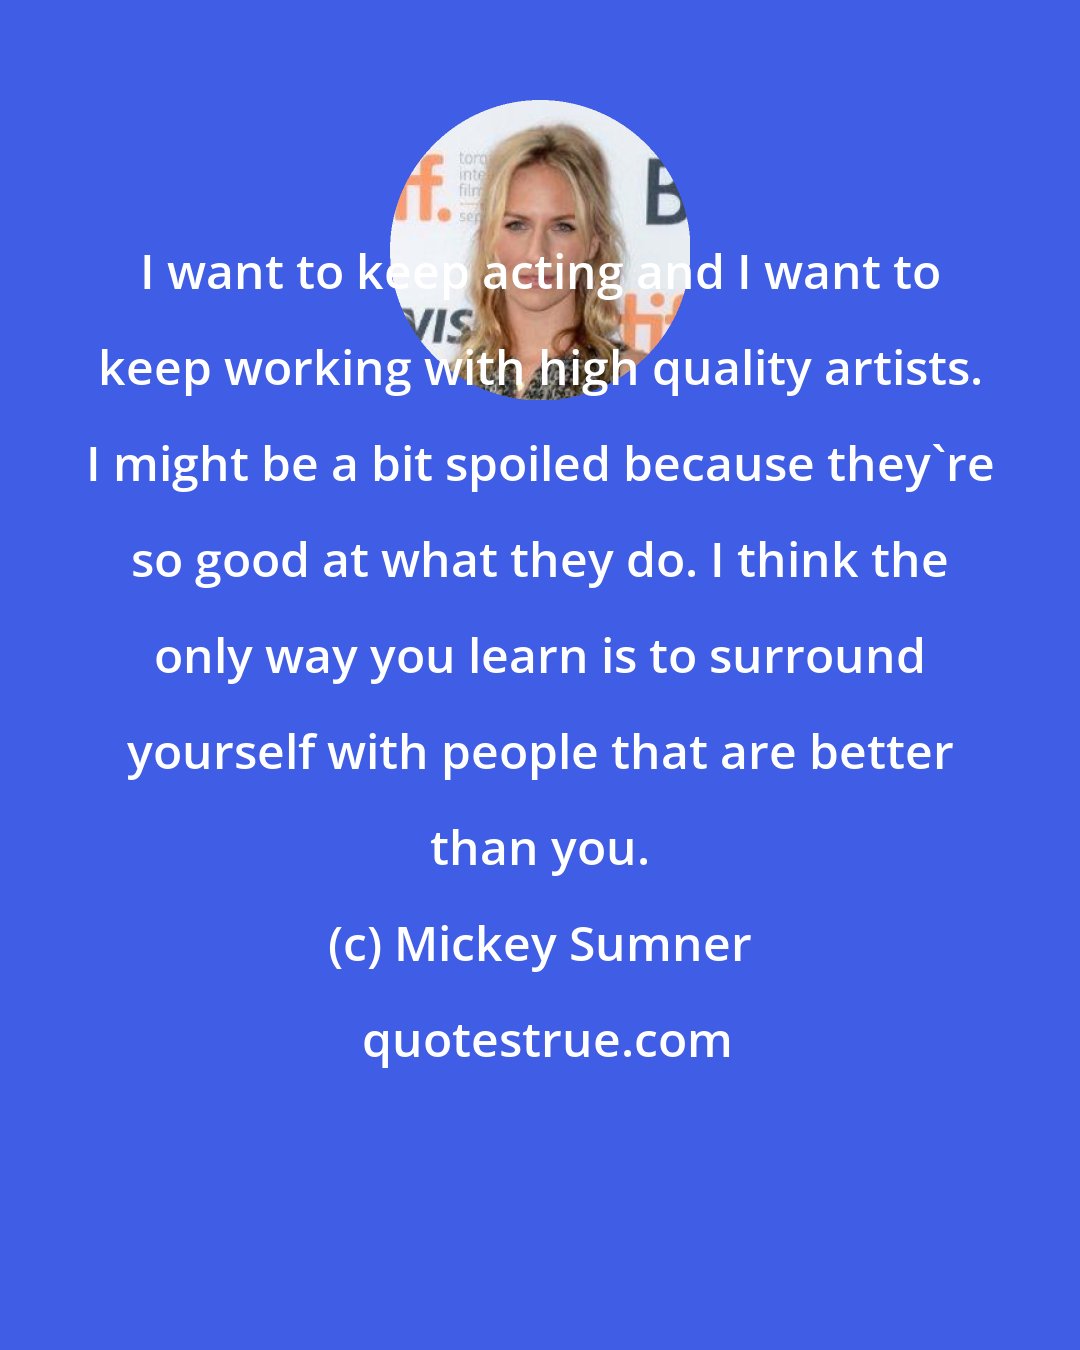 Mickey Sumner: I want to keep acting and I want to keep working with high quality artists. I might be a bit spoiled because they're so good at what they do. I think the only way you learn is to surround yourself with people that are better than you.